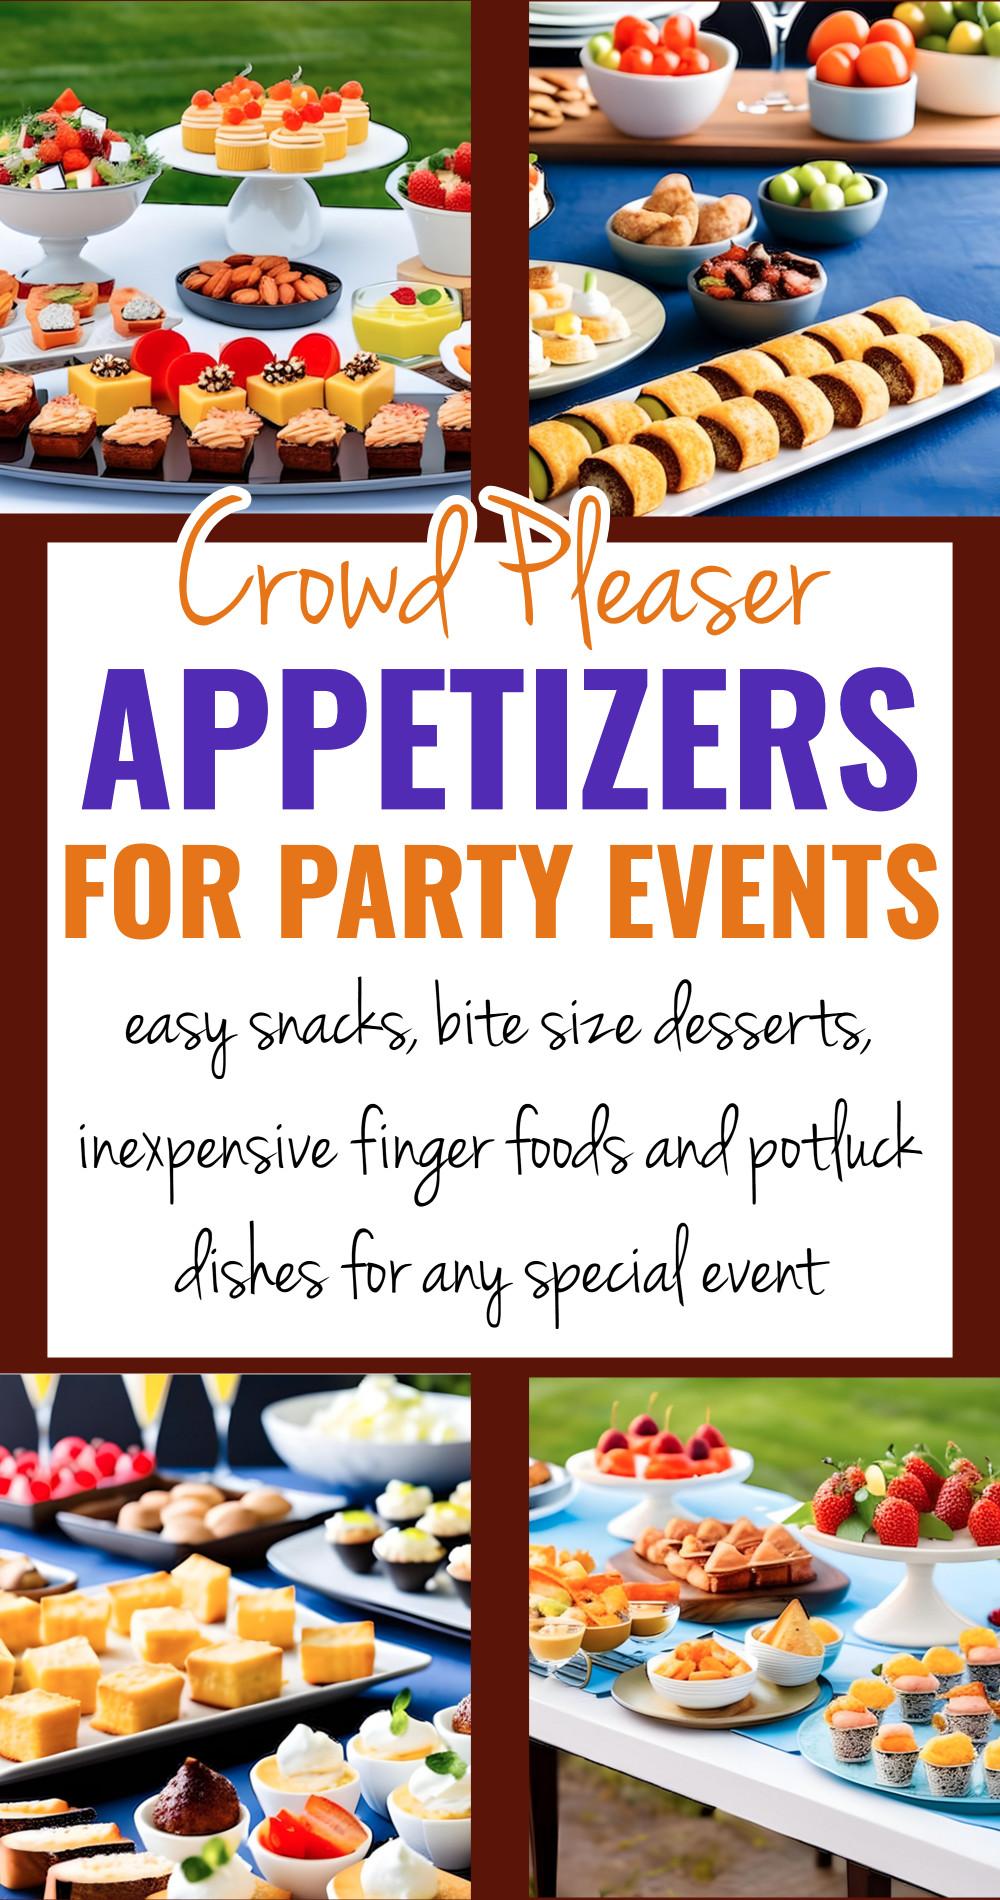 Appetizers for Party Events - easy inexpensive snacks, finger foods, bite size desserts and potluck dishes